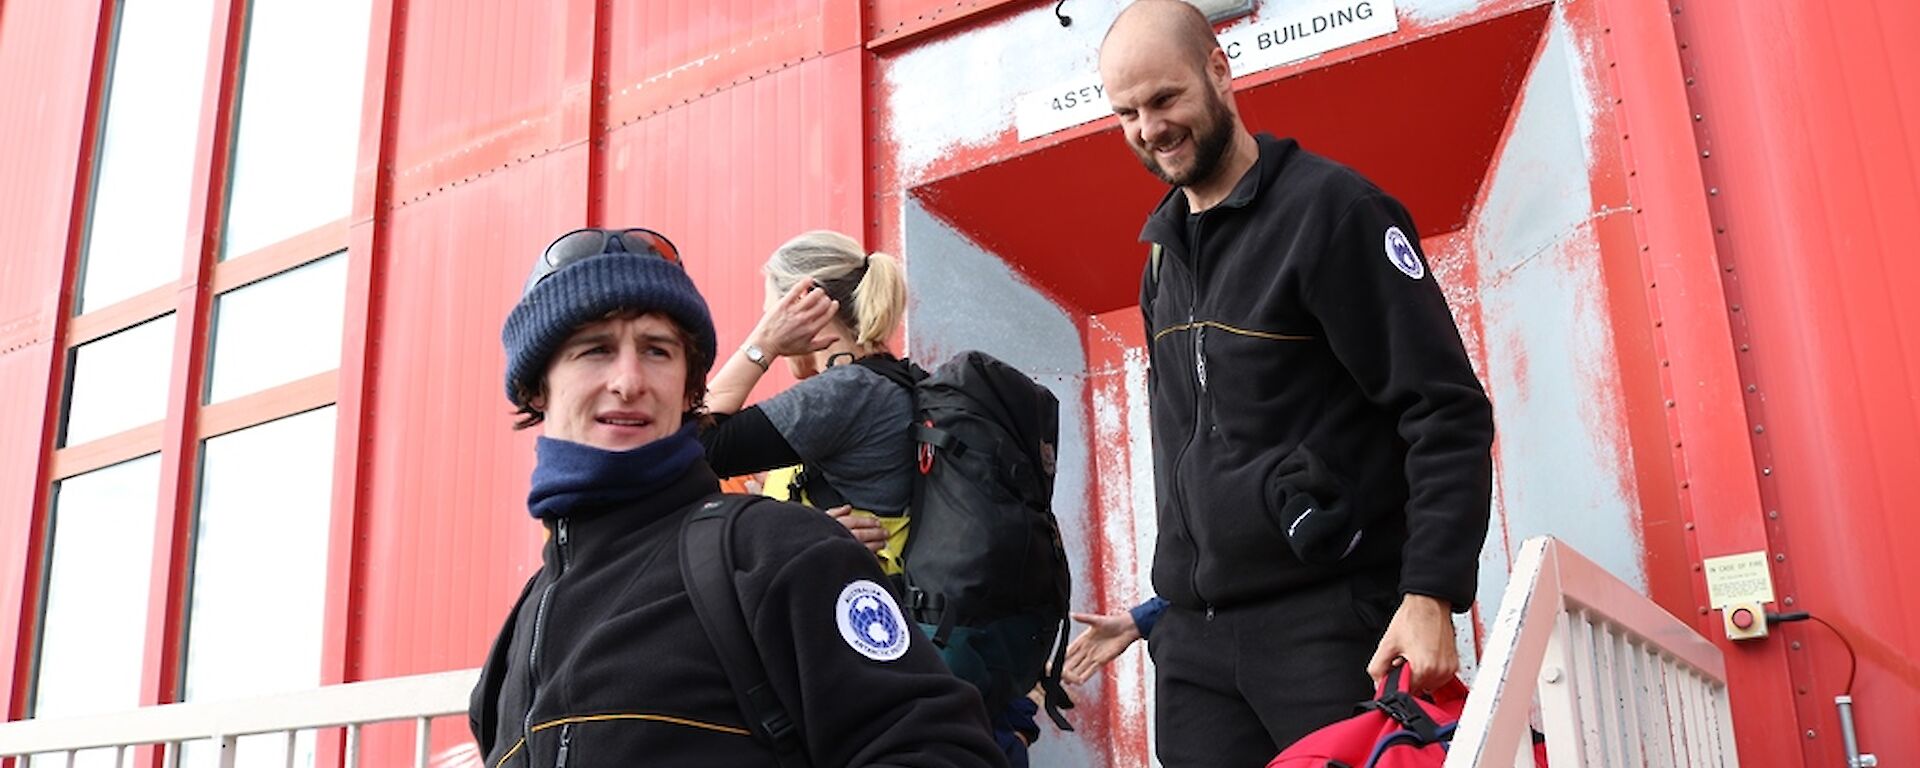 Three expeditioners leaving accommodation building to get into over snow vehicles